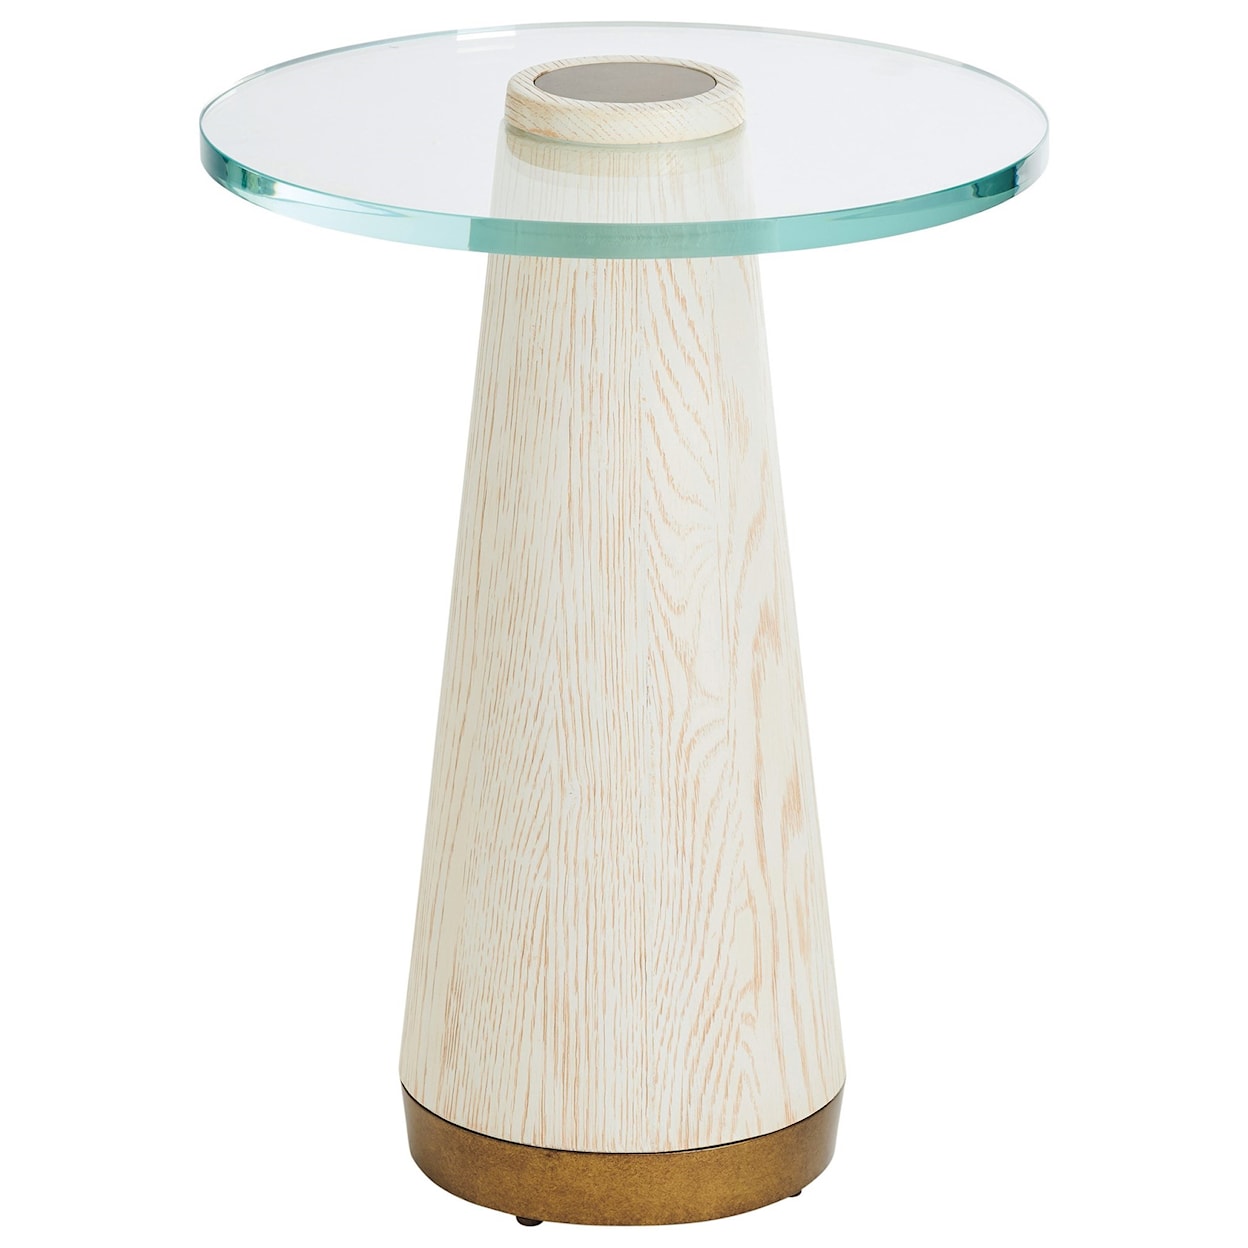 Barclay Butera Carmel Castlewood Glass Top Accent Table